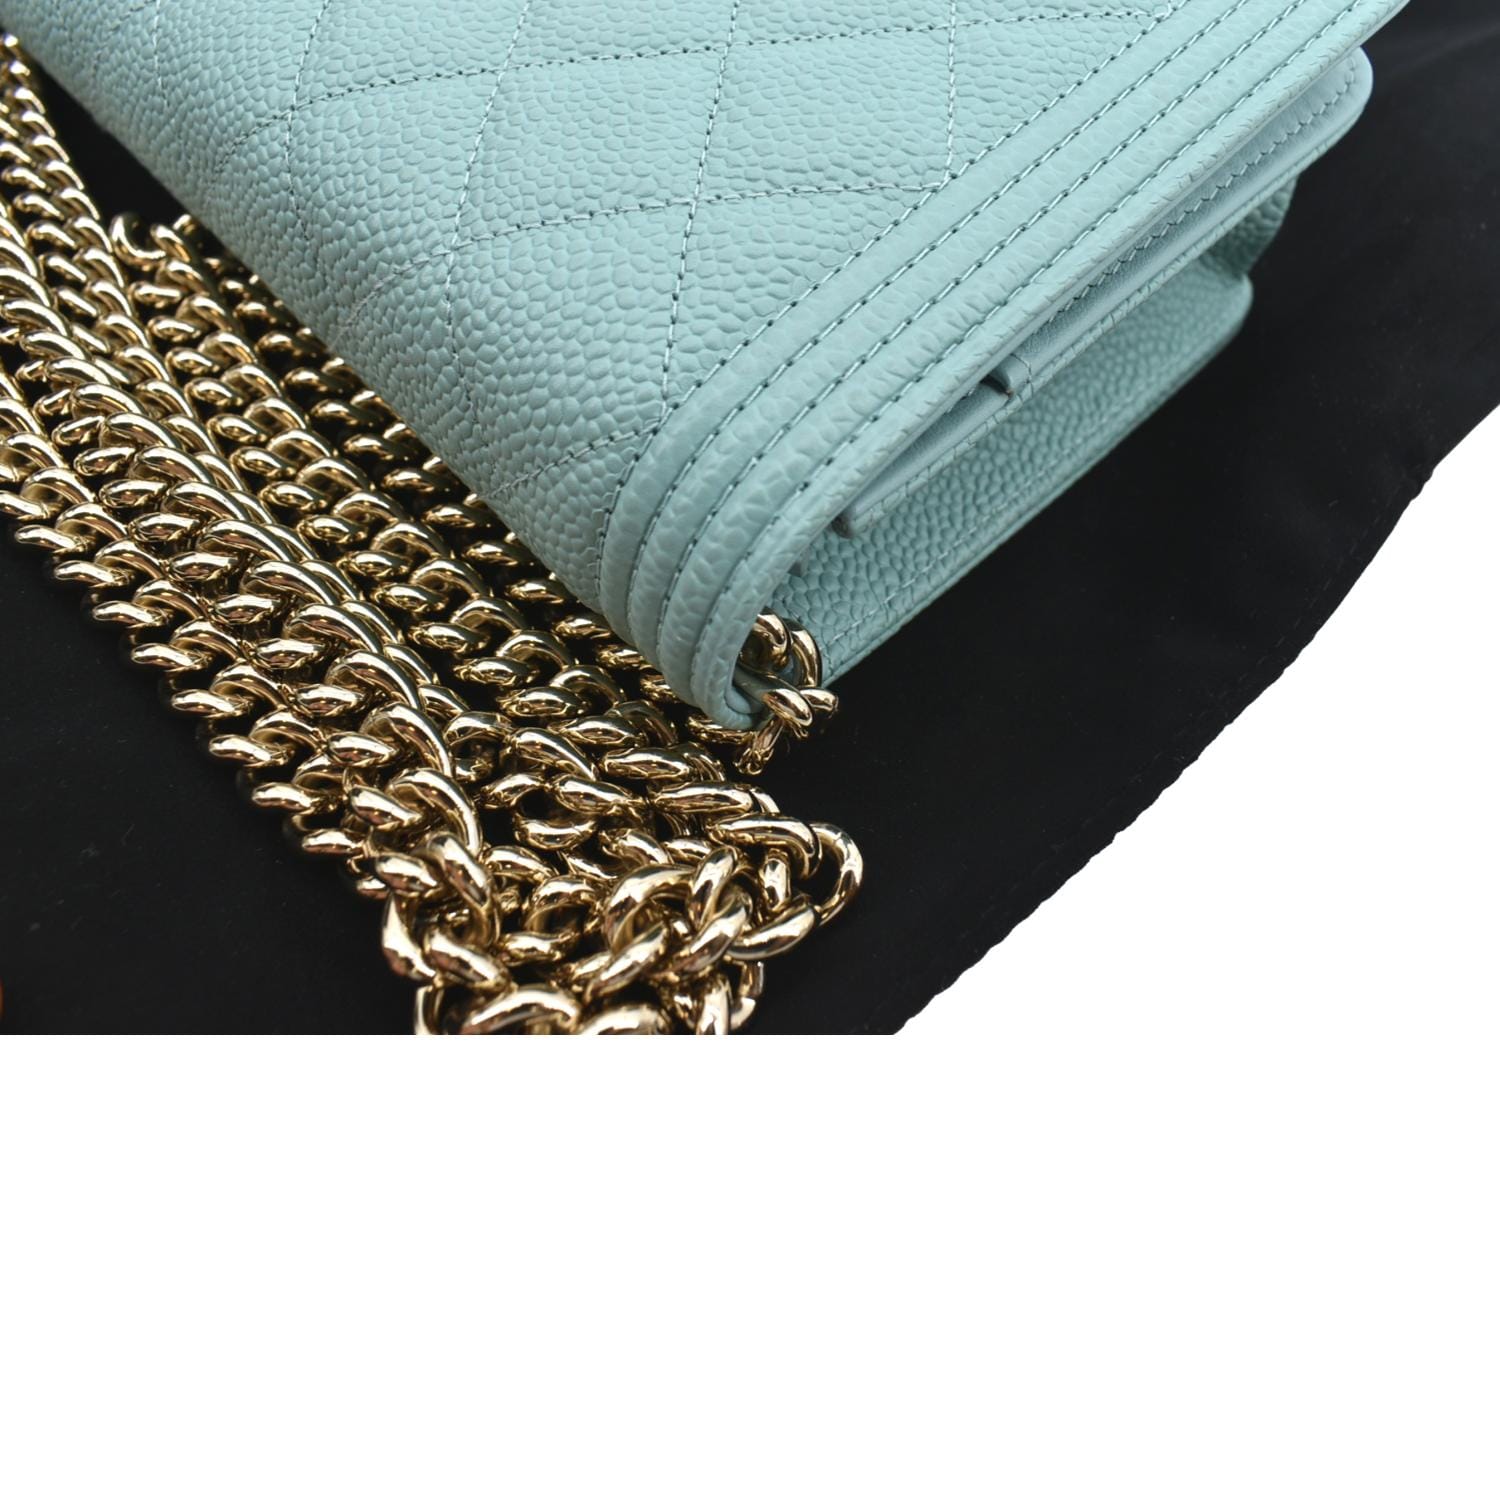 22S Light Blue Caviar Quilted Wallet On Chain (WOC)